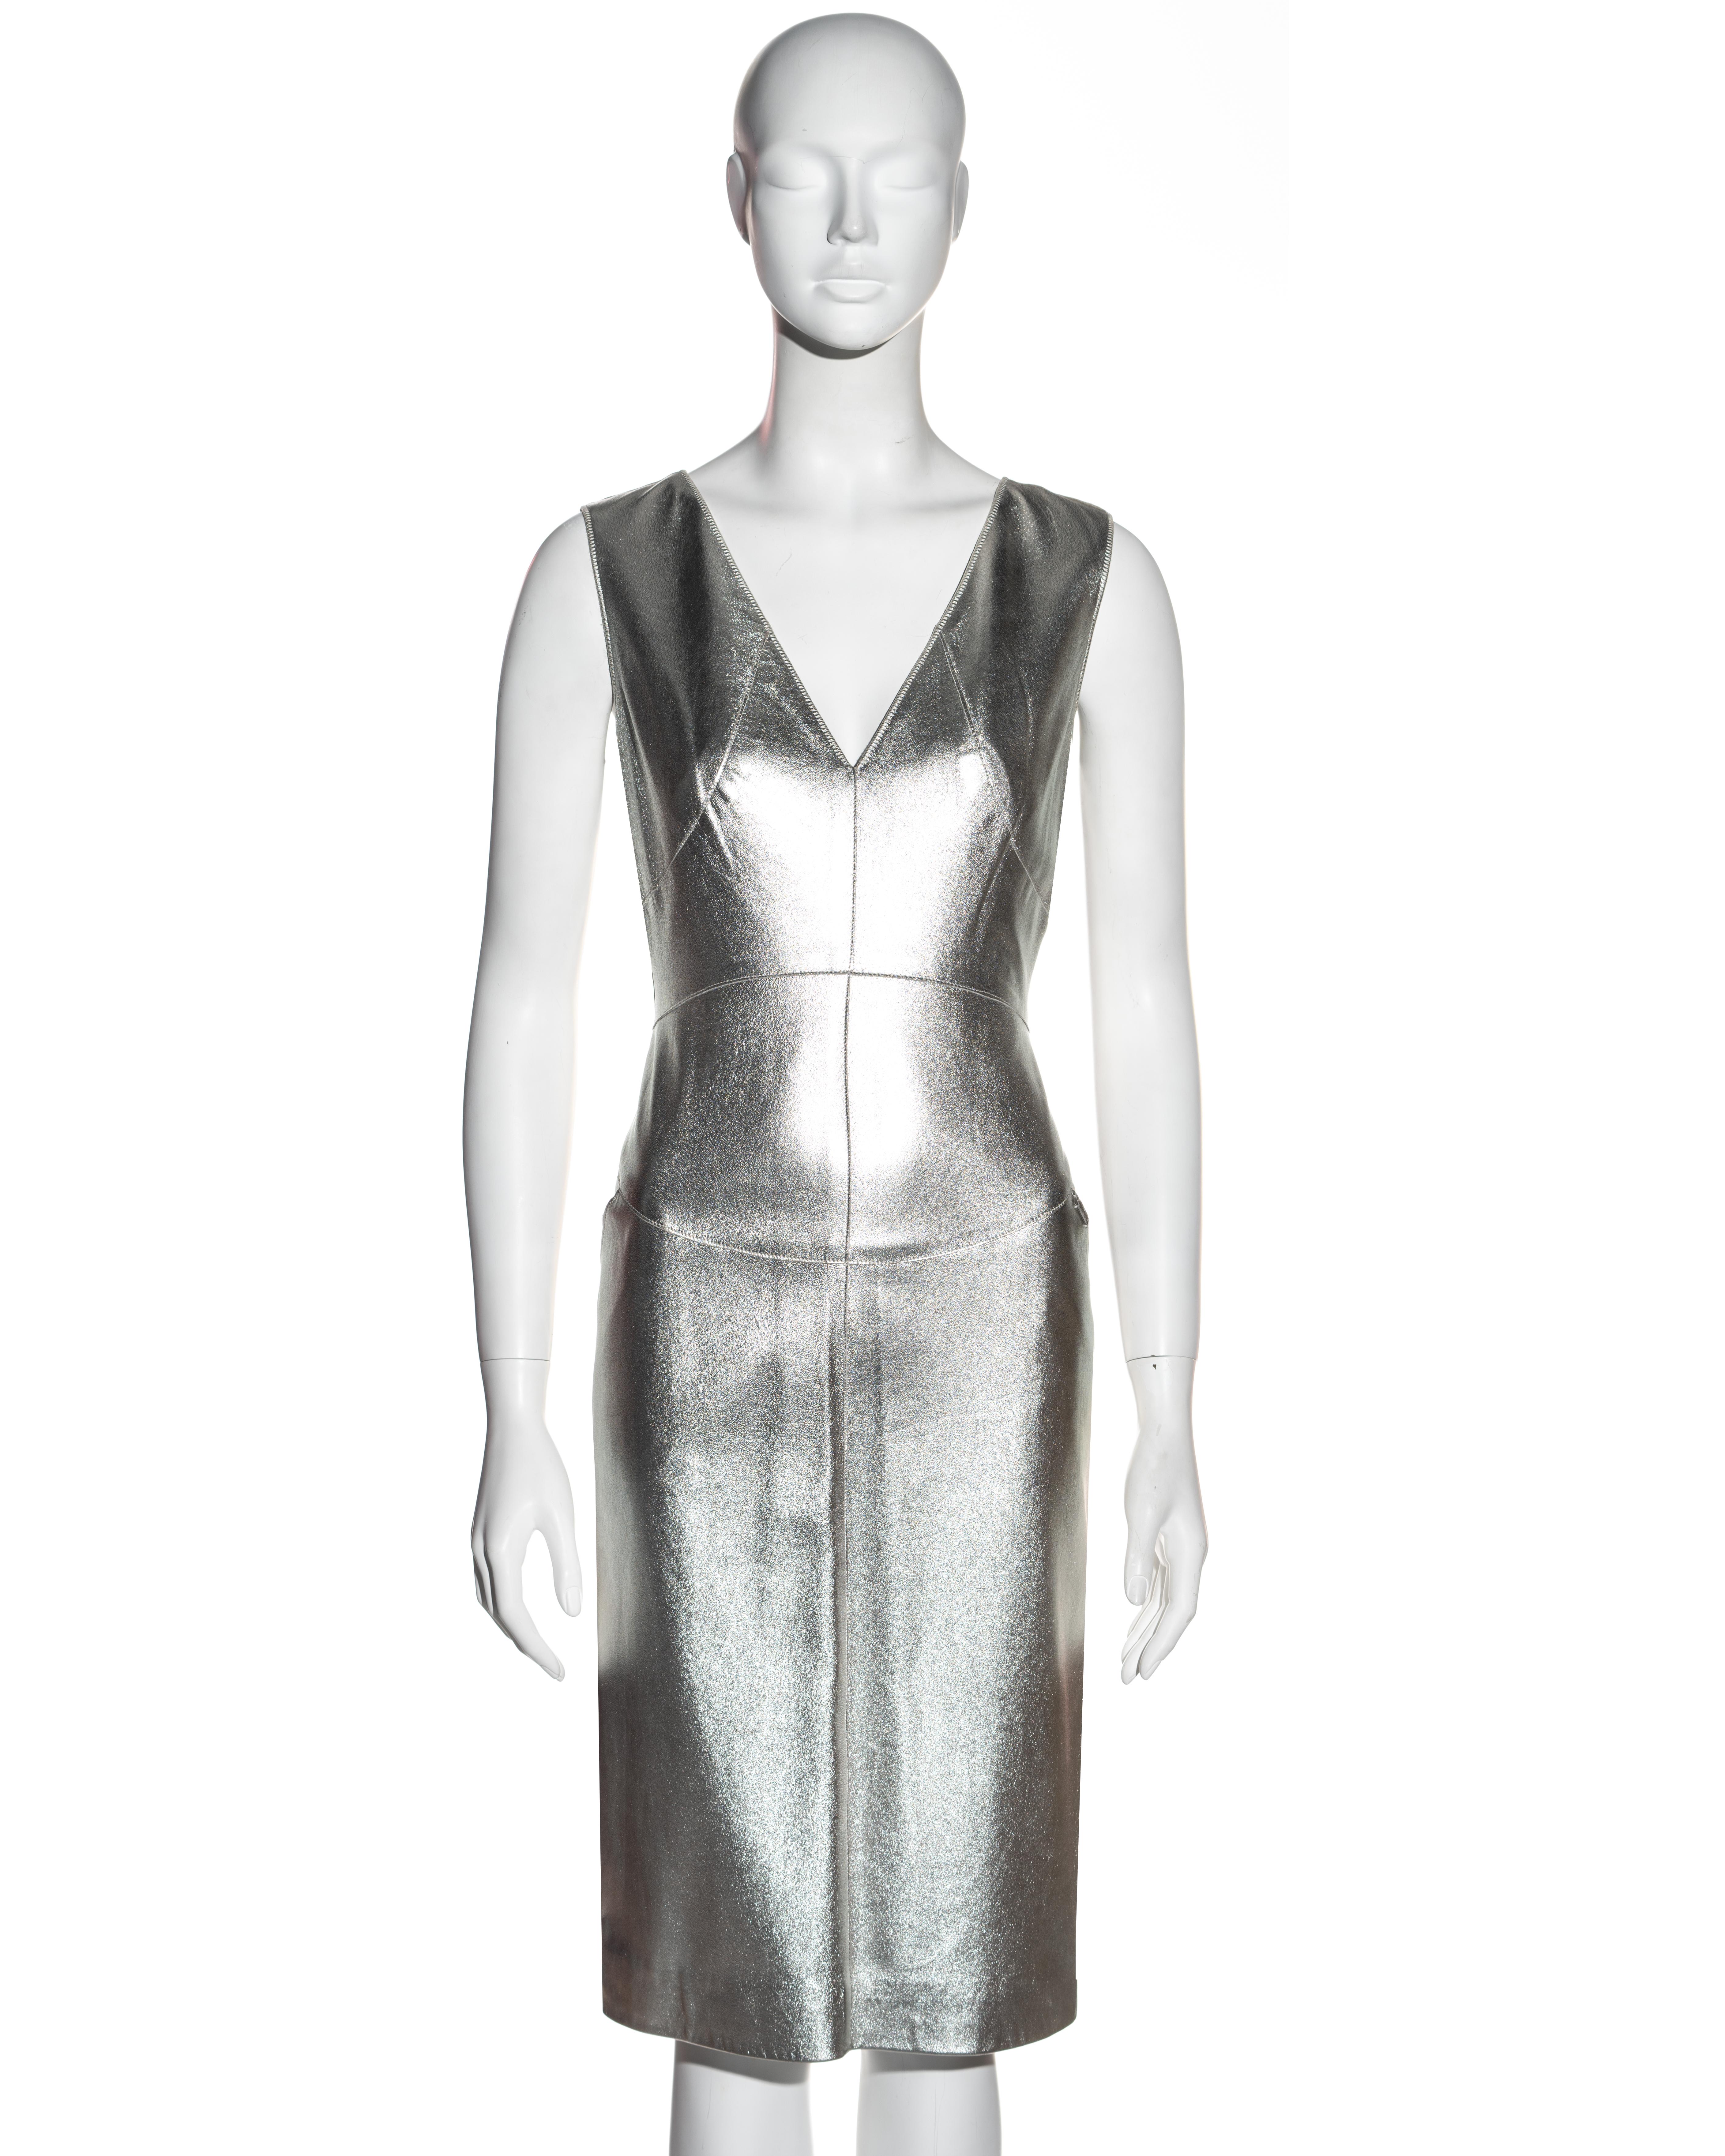 ▪ Chanel metallic silver lambskin leather sheath dress
▪ Designed by Karl Lagerfeld 
▪ V-neck
▪ 2 front pockets
▪ Top stitch seams with raw edge 
▪ Curved seaming accentuates the waist
▪ Zipper down centre back 
▪ IT 44 - FR 40 - UK 12 - US 8
▪